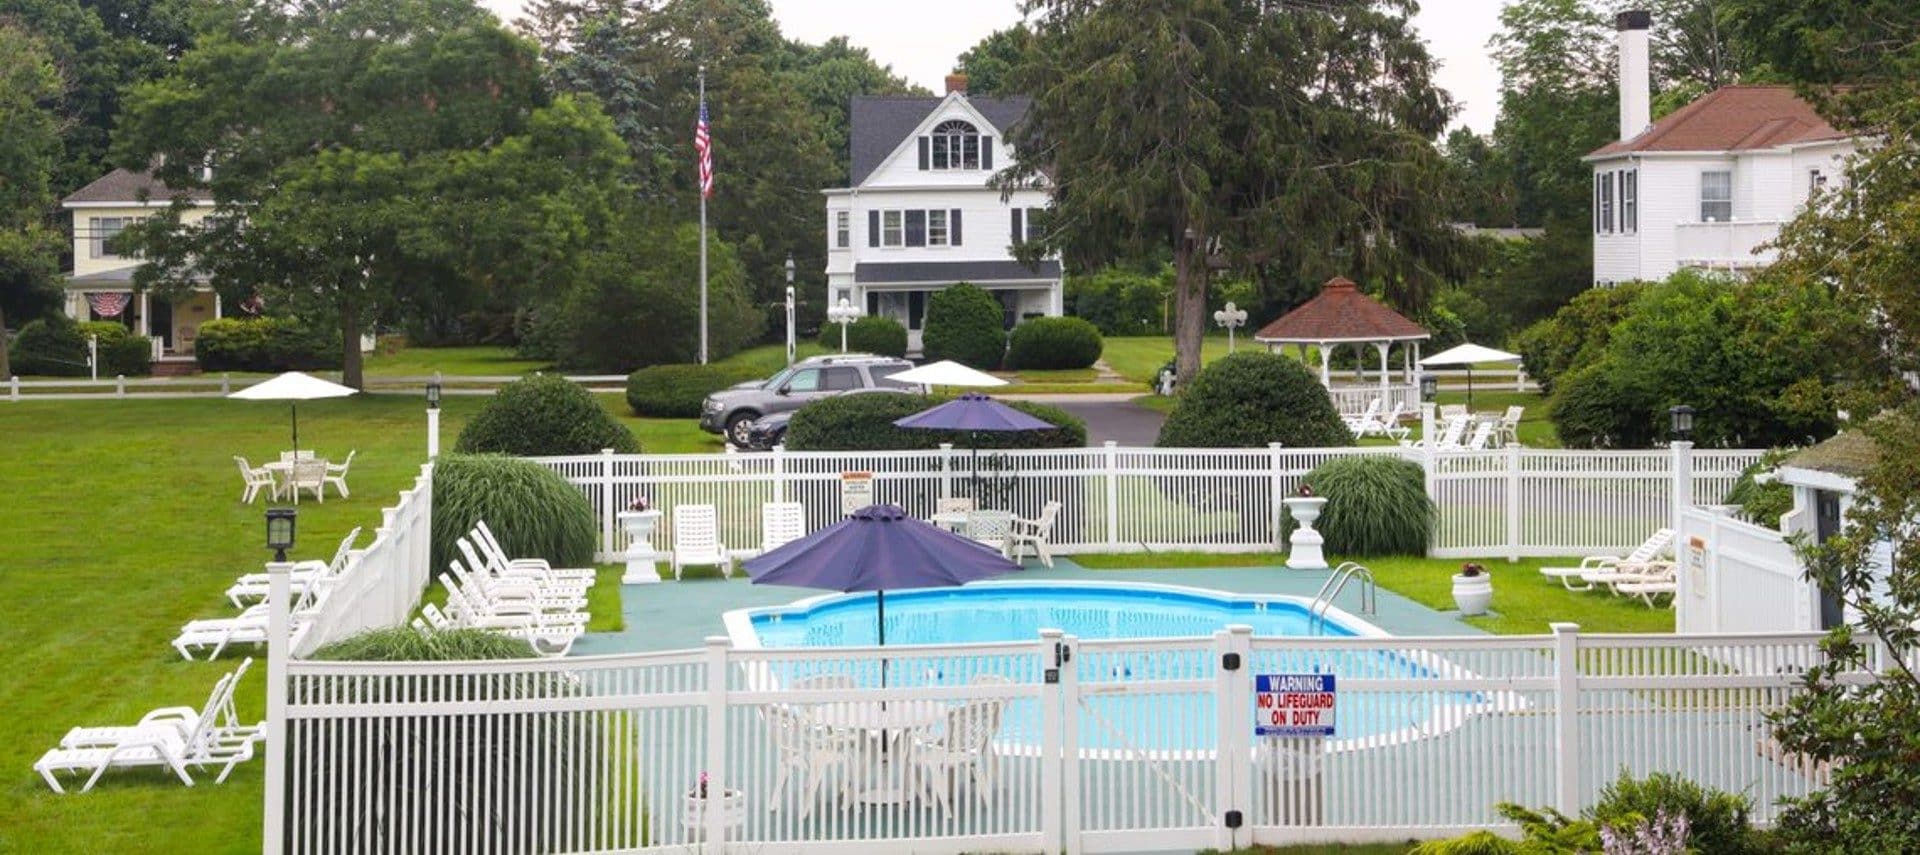 Outdoor pool with white fence and lounging chairs surrounded by several homes